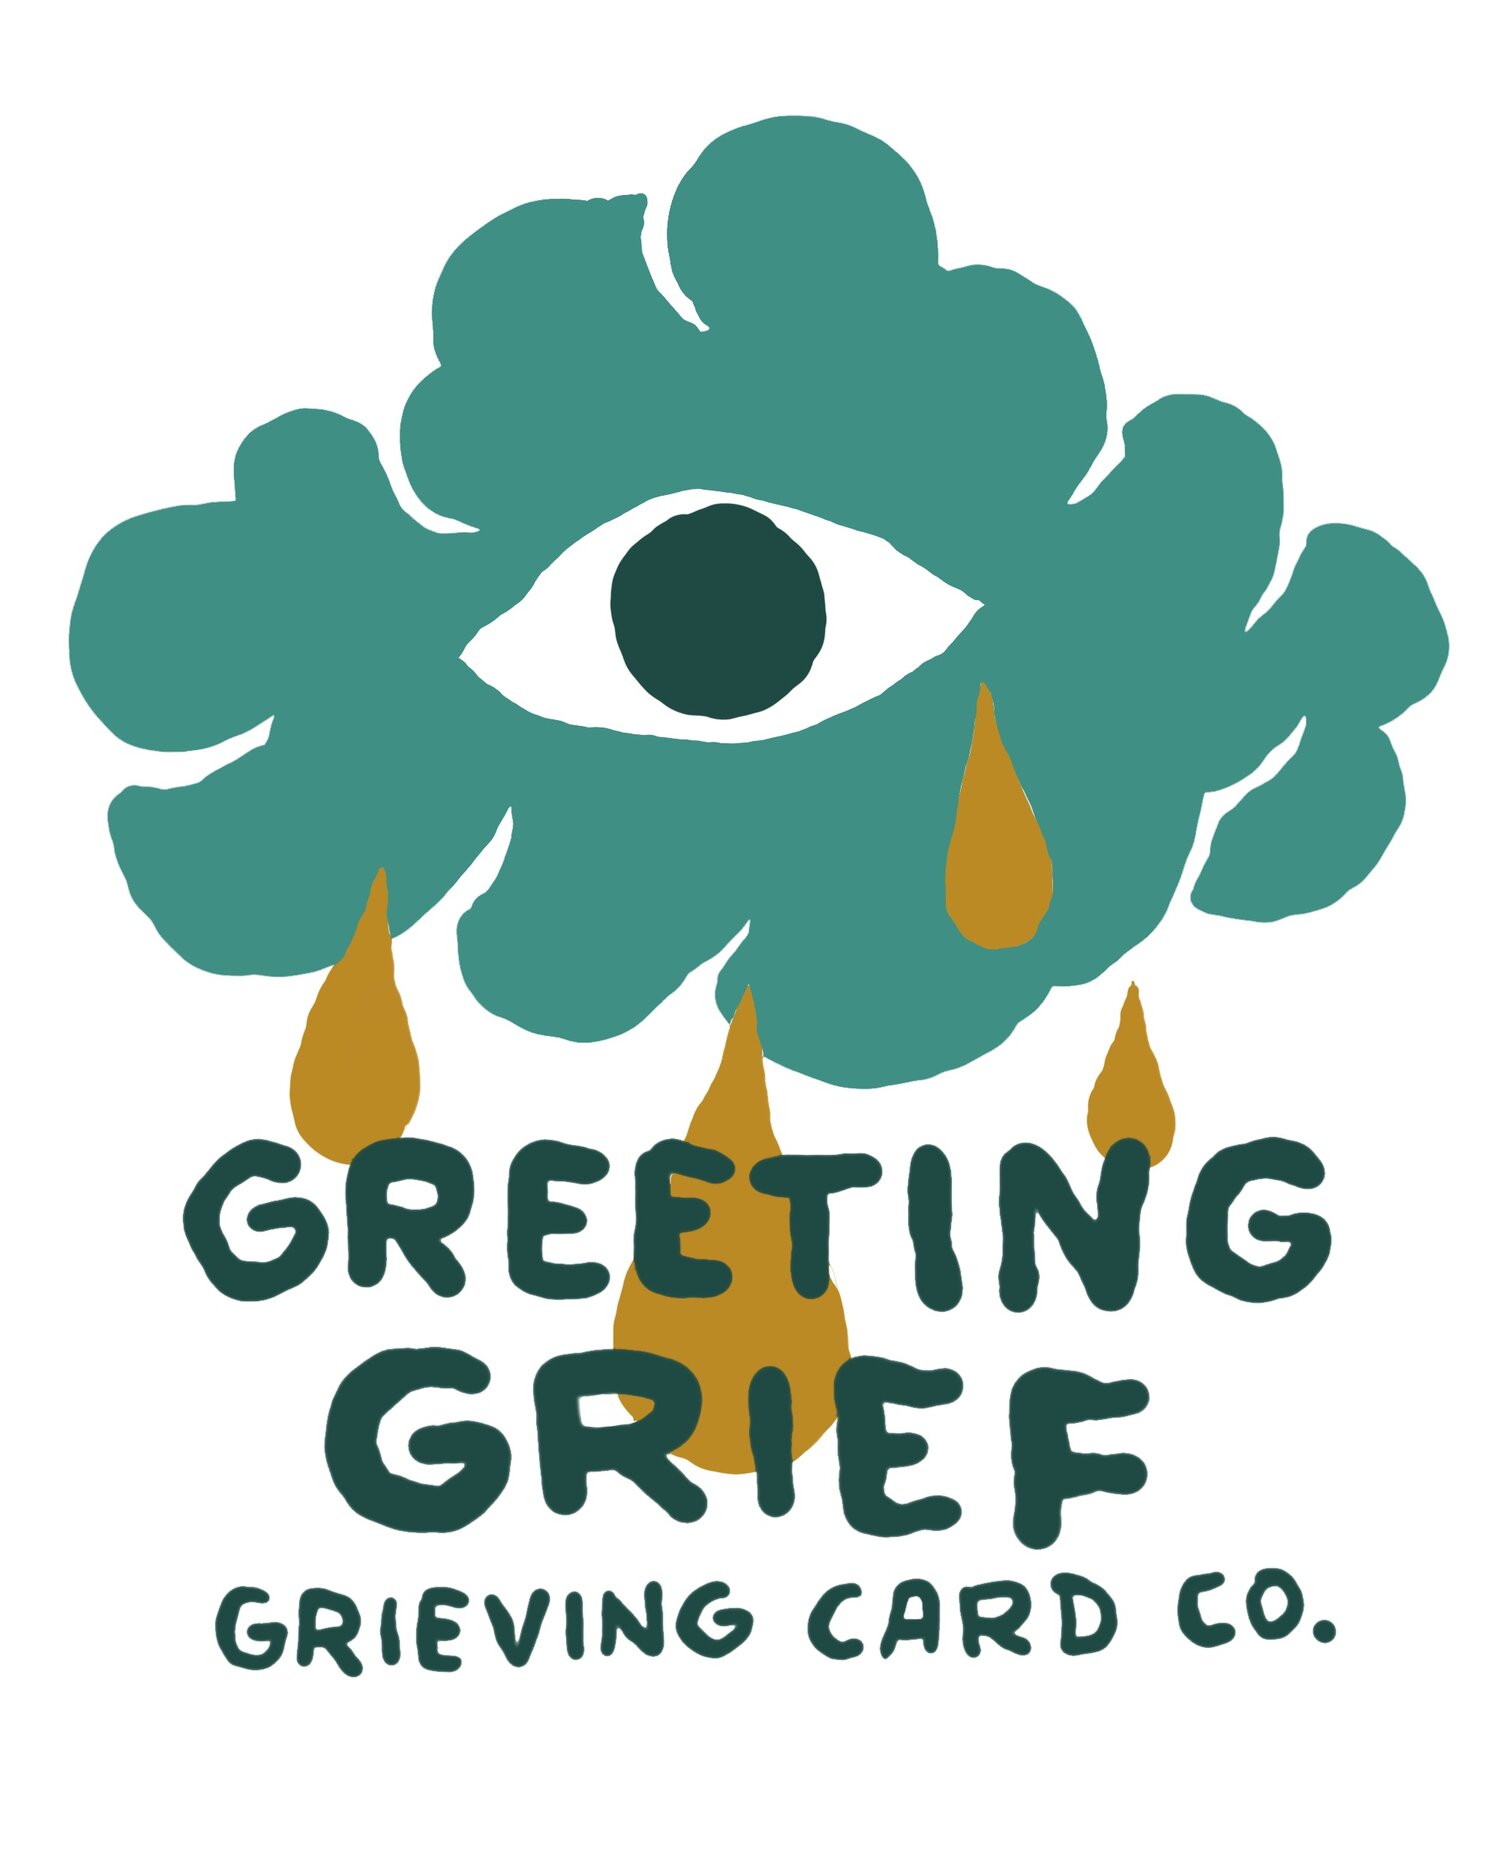 Greeting Grief